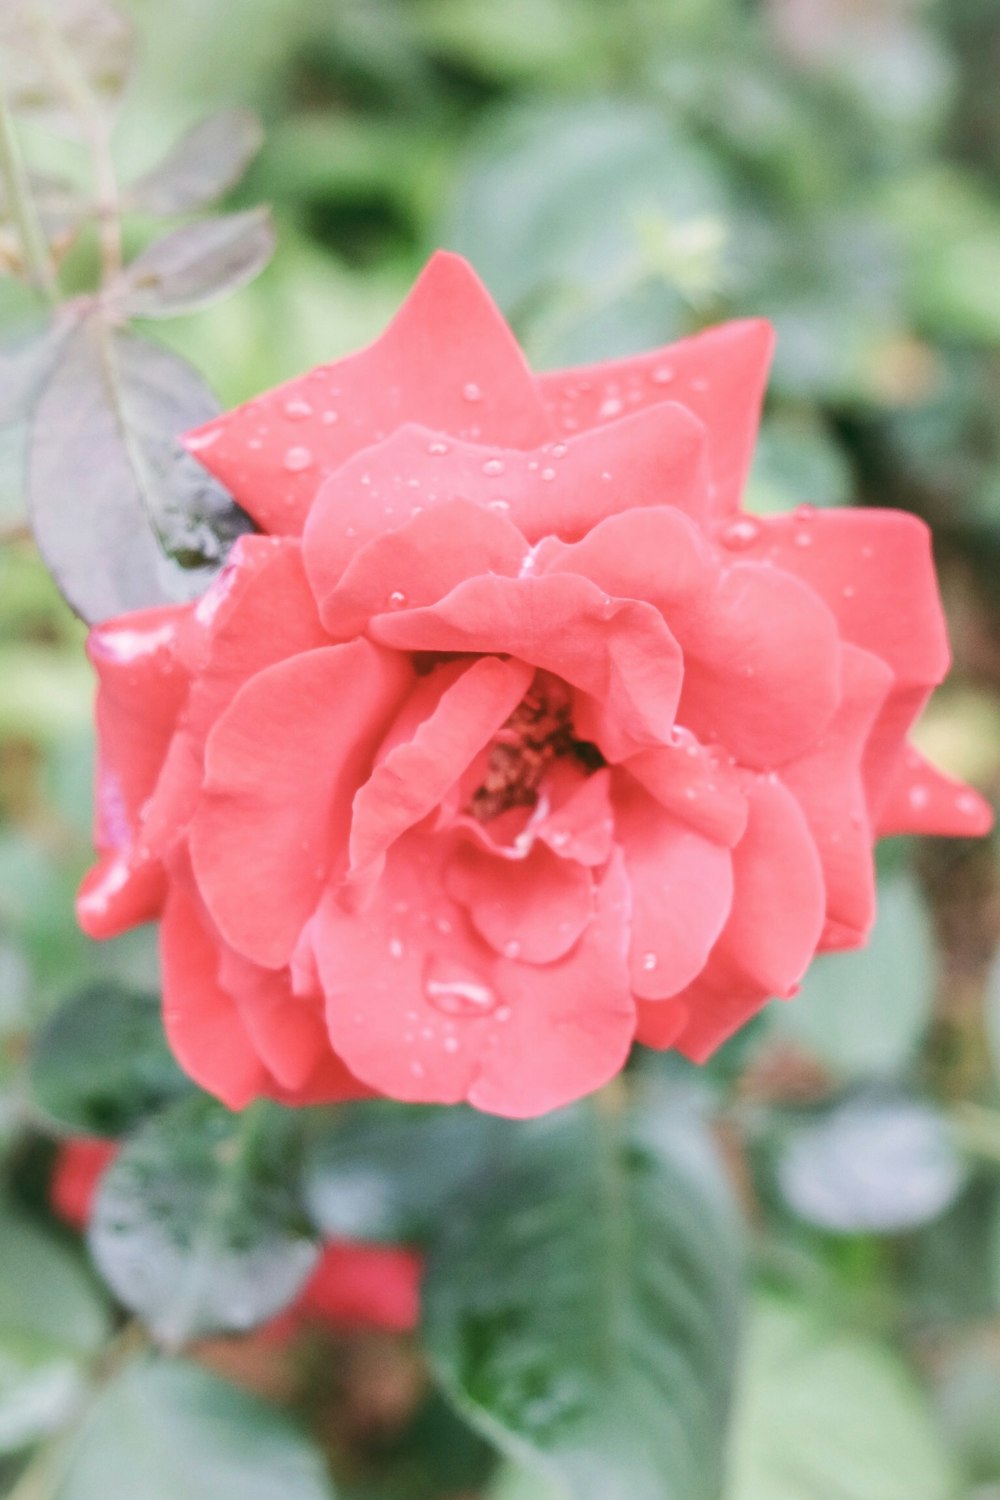 selective focus photo of red petaled flower with dew drops